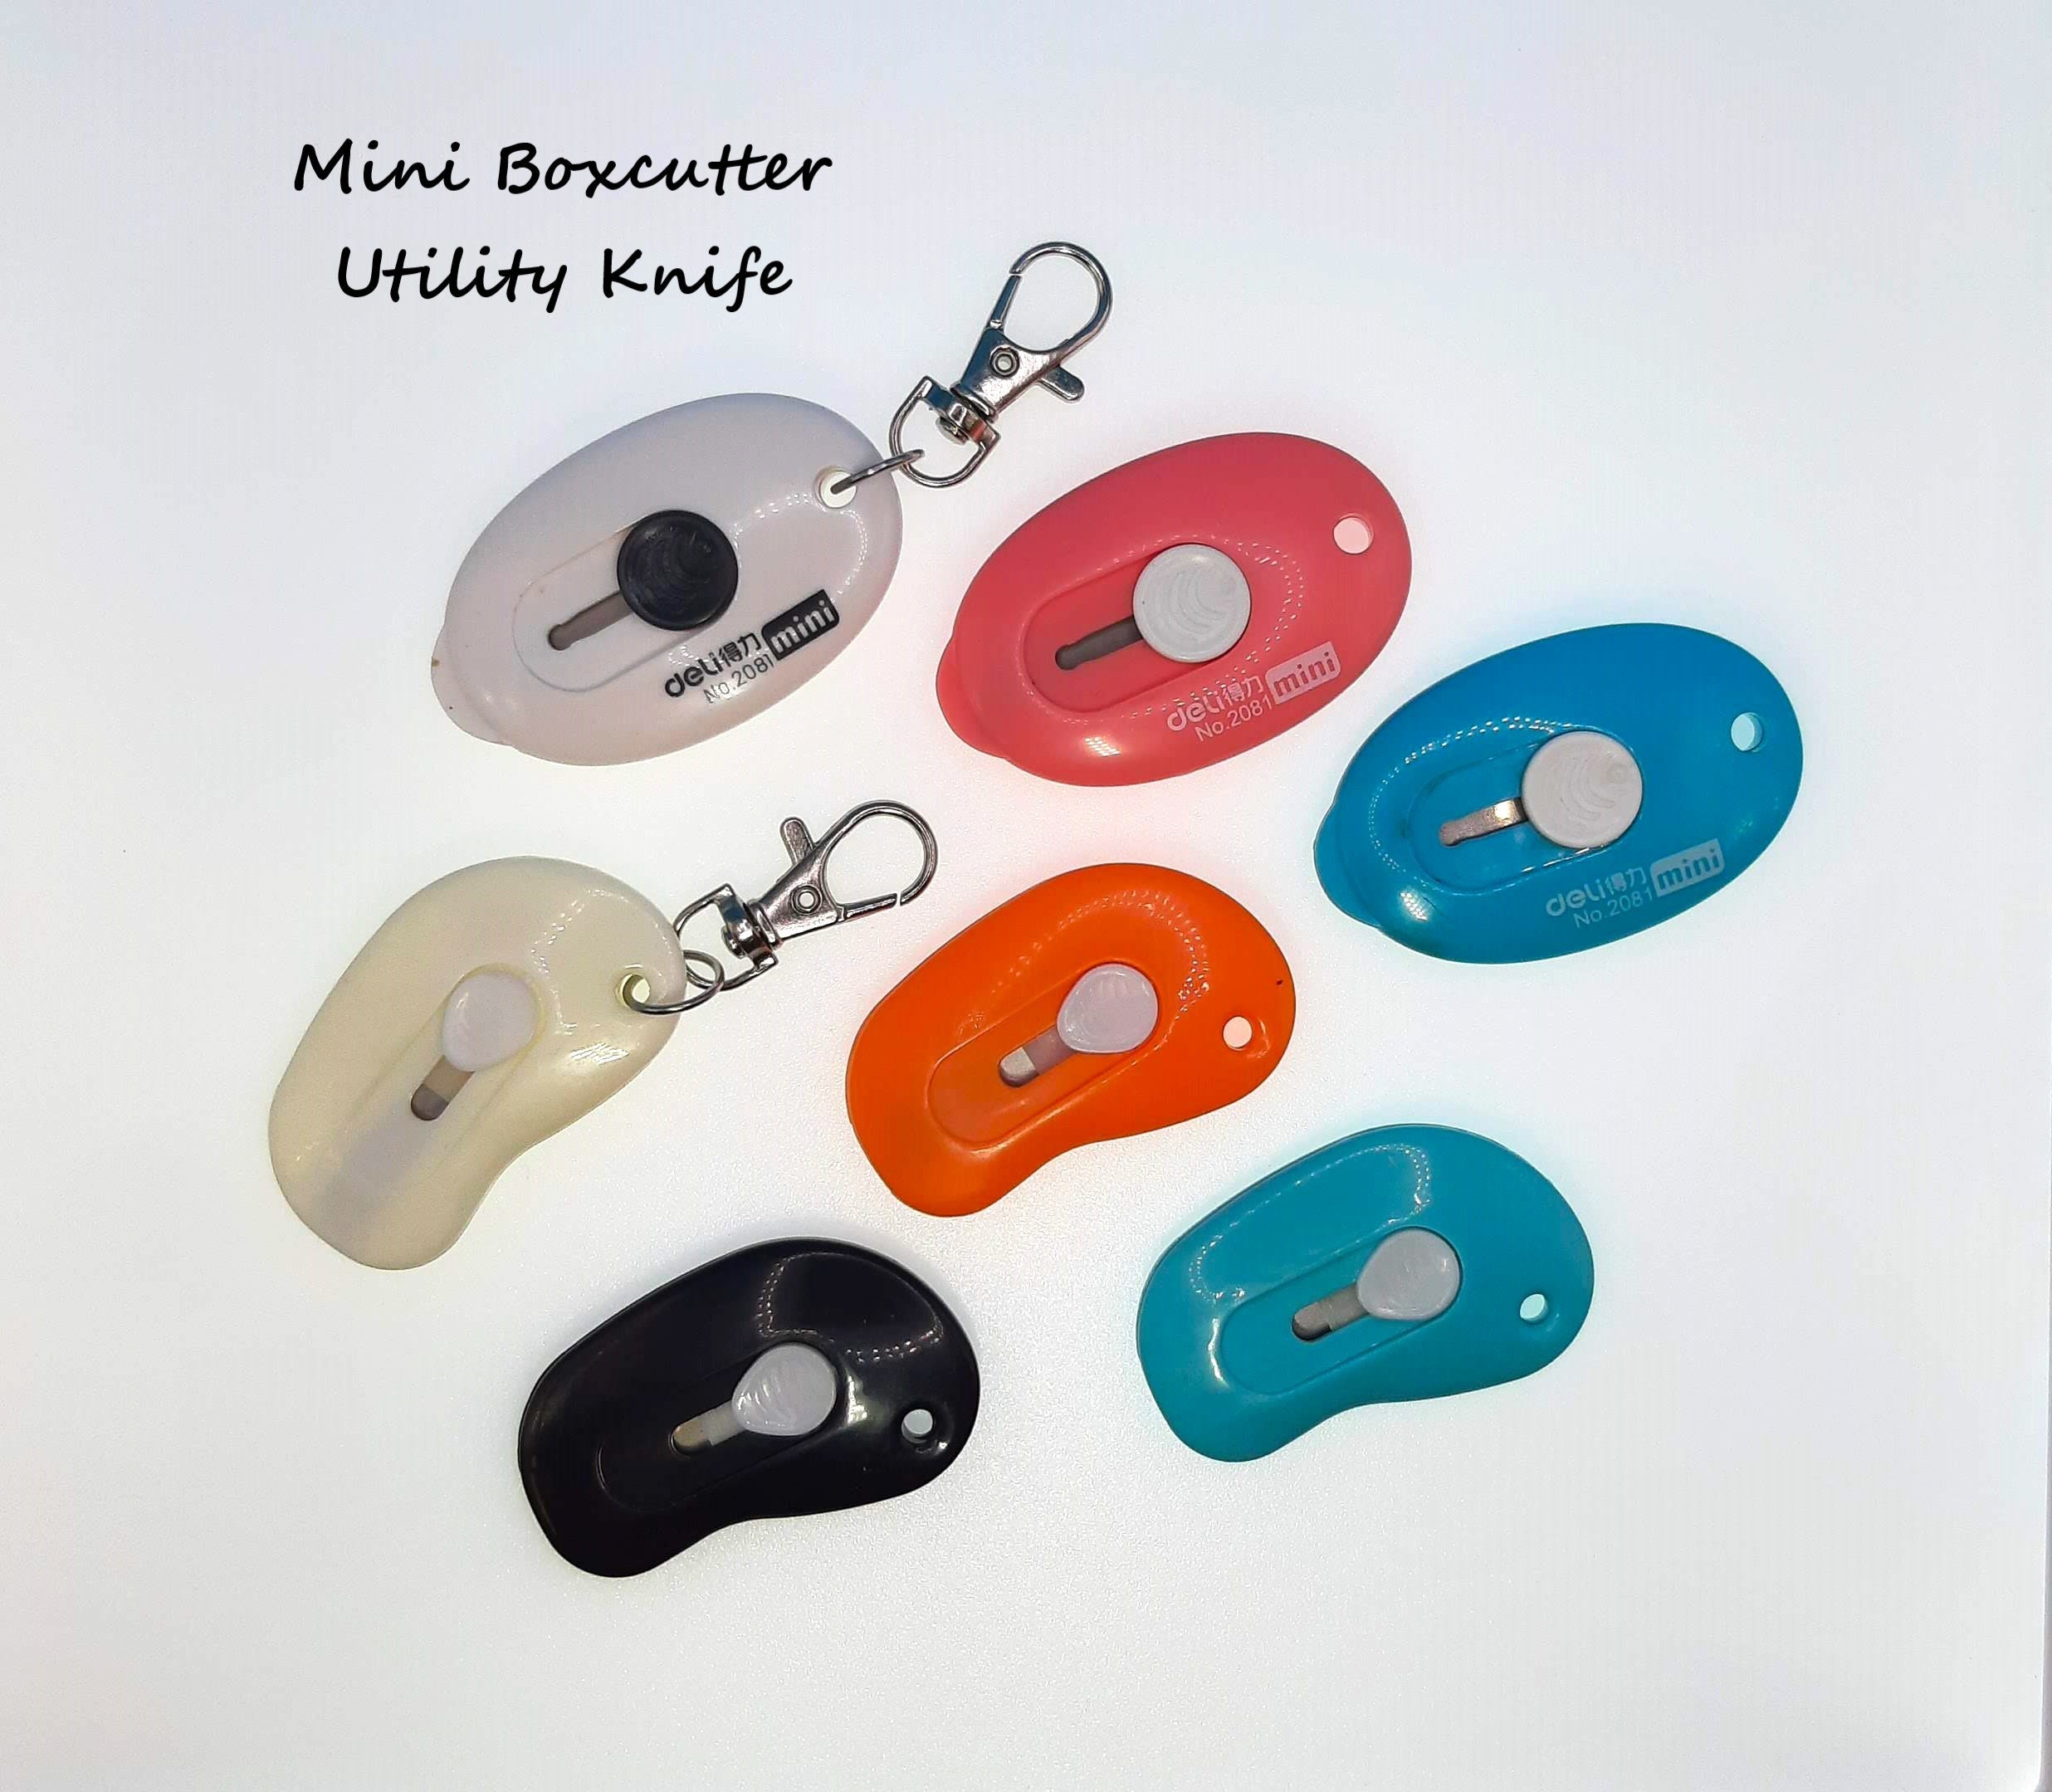 Mini Retractable Utility Knife Box Cutter Easy to Carry Fits in Pocket or  Attach to Badge Reel, Backpack, Purse, Etc. 